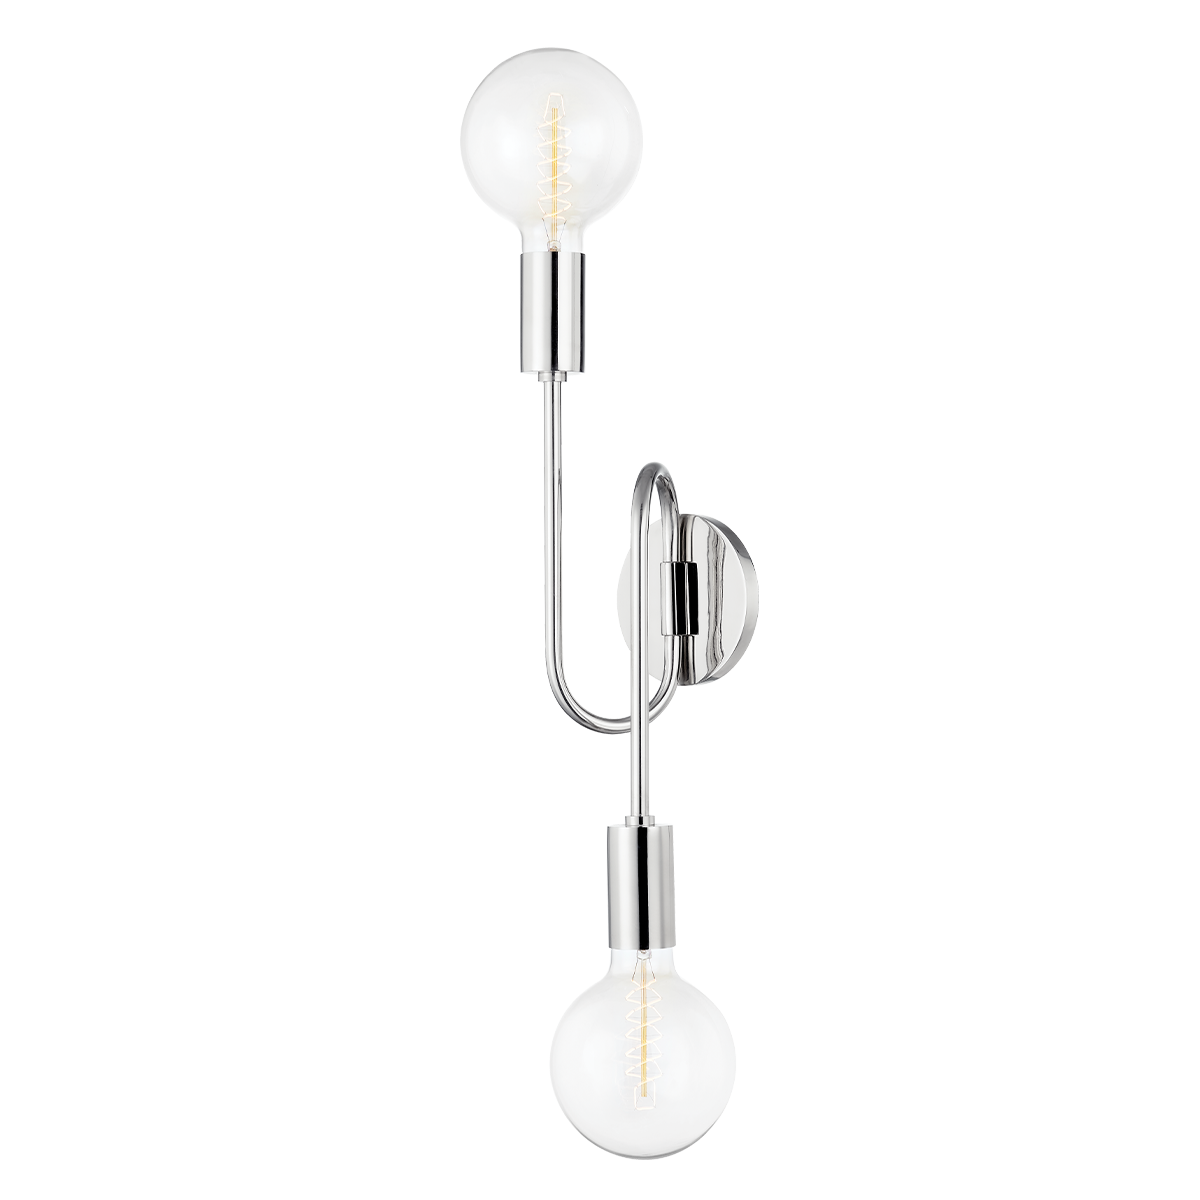 Steel Curve Arm with Opal Matte Glass Globe Wall Sconce